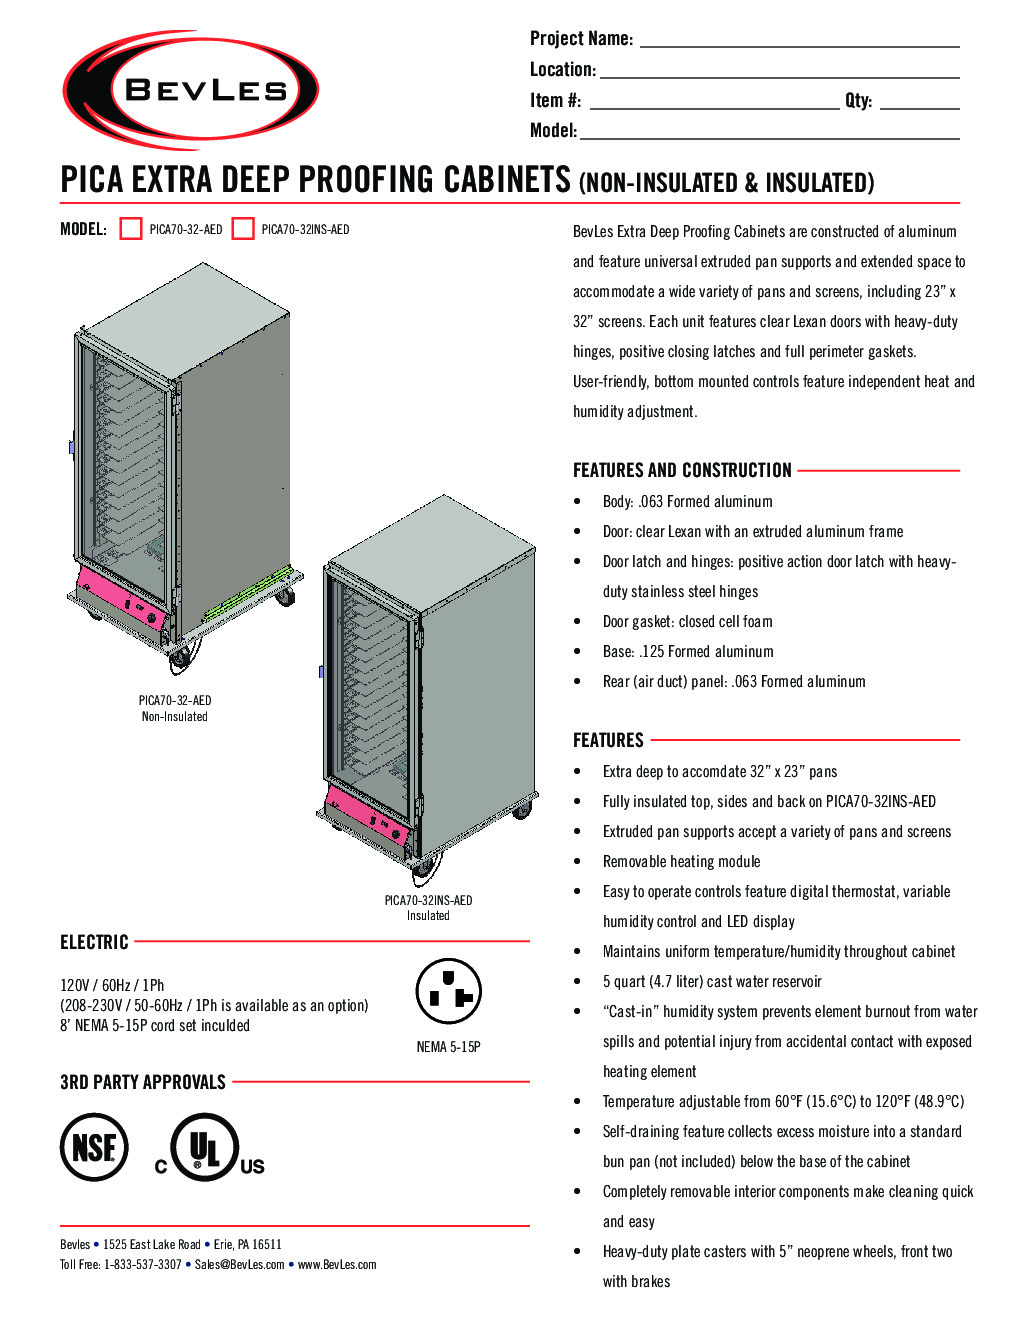 BevLes Company PICA70-32INS-AED-4R2 Mobile Proofer Cabinet